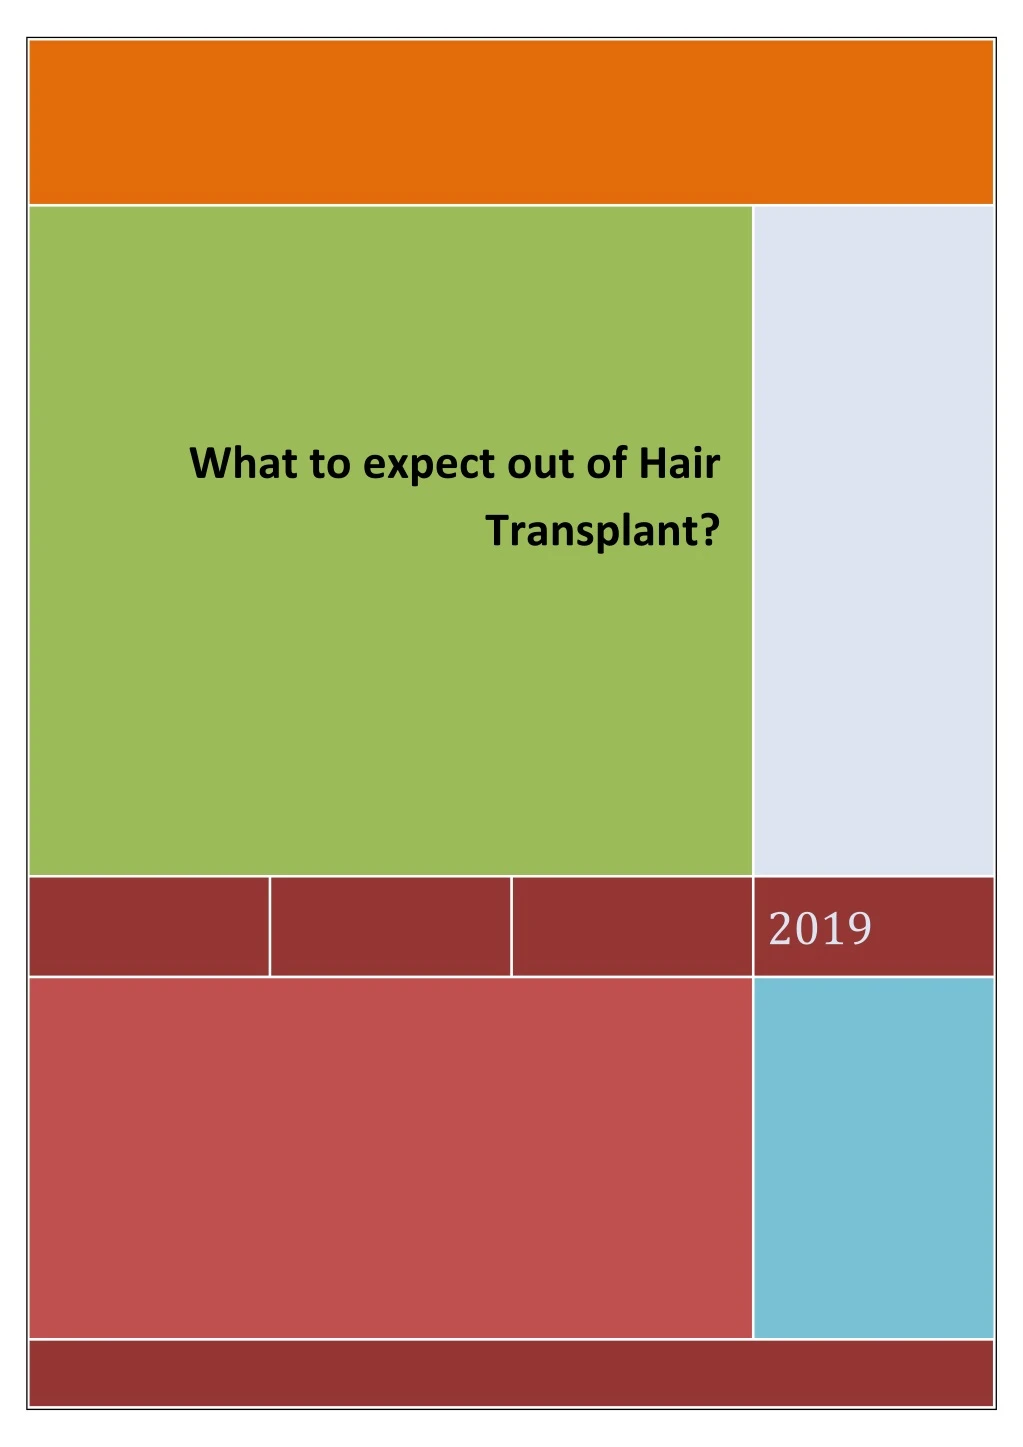 what to expect out of hair